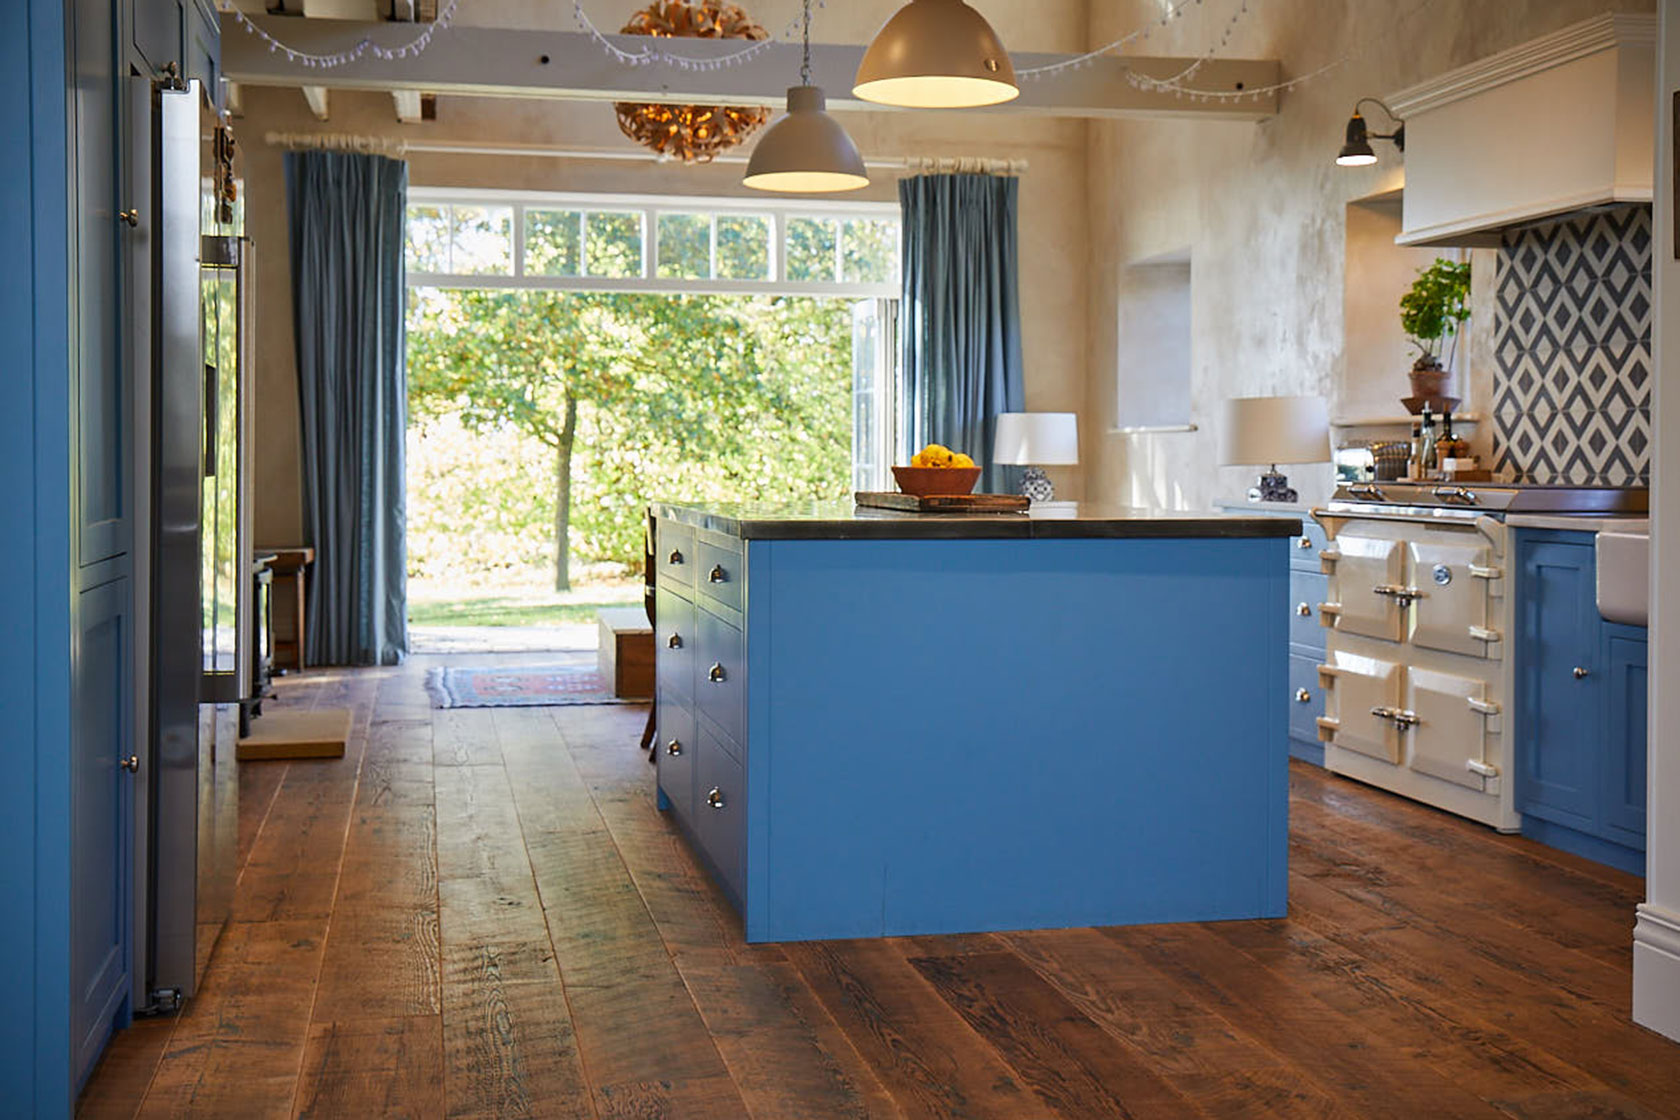 Flat baby blue end panel with pinewood engineered floor boards